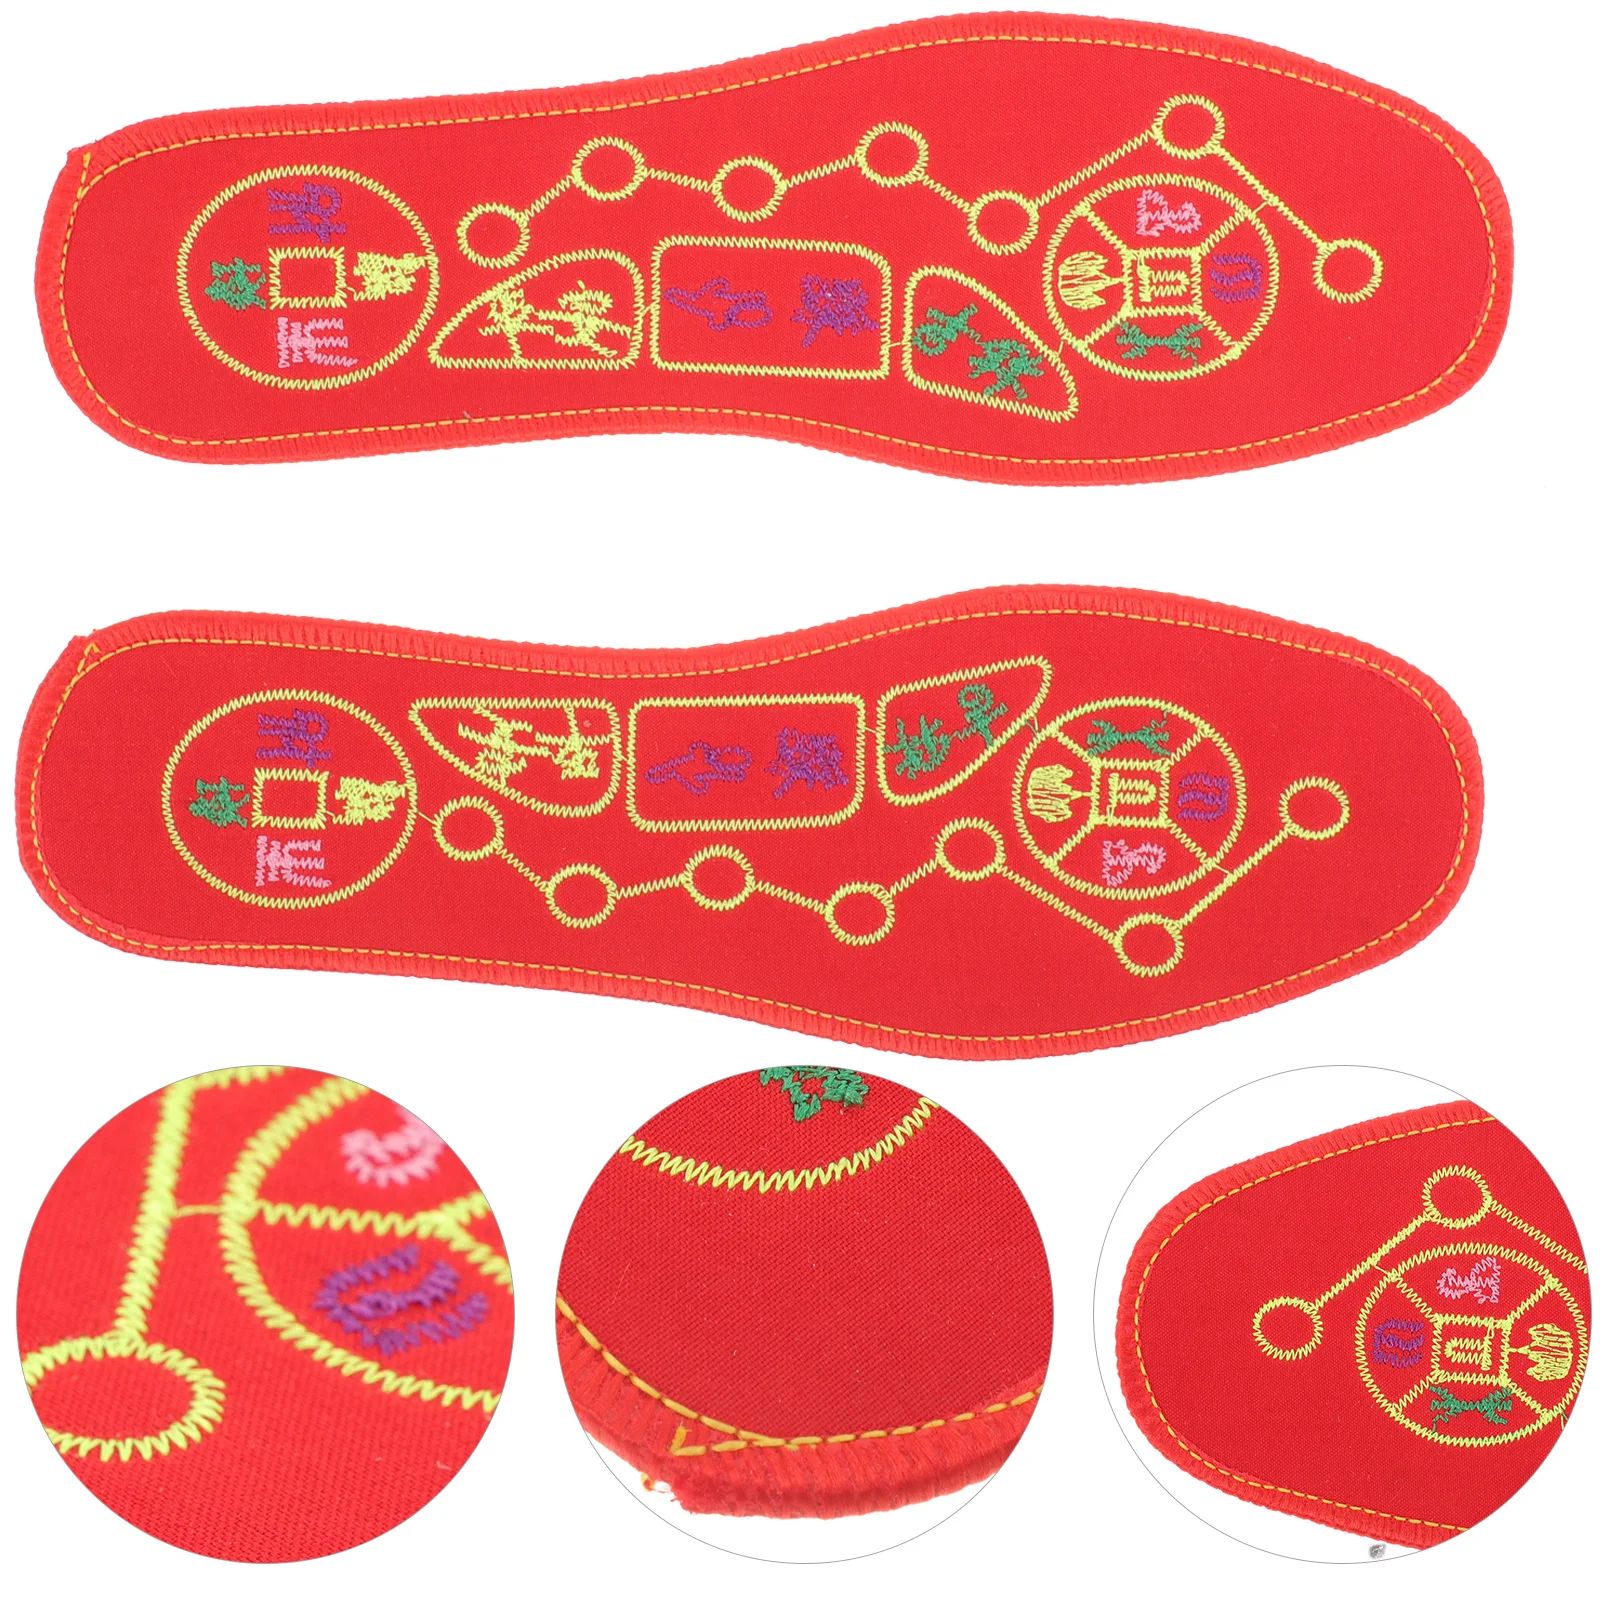 Sports Insoles 2 Pairs of Foot Pedal Seven-star Good Luck for The Year Your Inserts Replacement 10 pairs disposable thin sweat absorbent wood pulp sports shoe insoles non slip shoe pads breathable